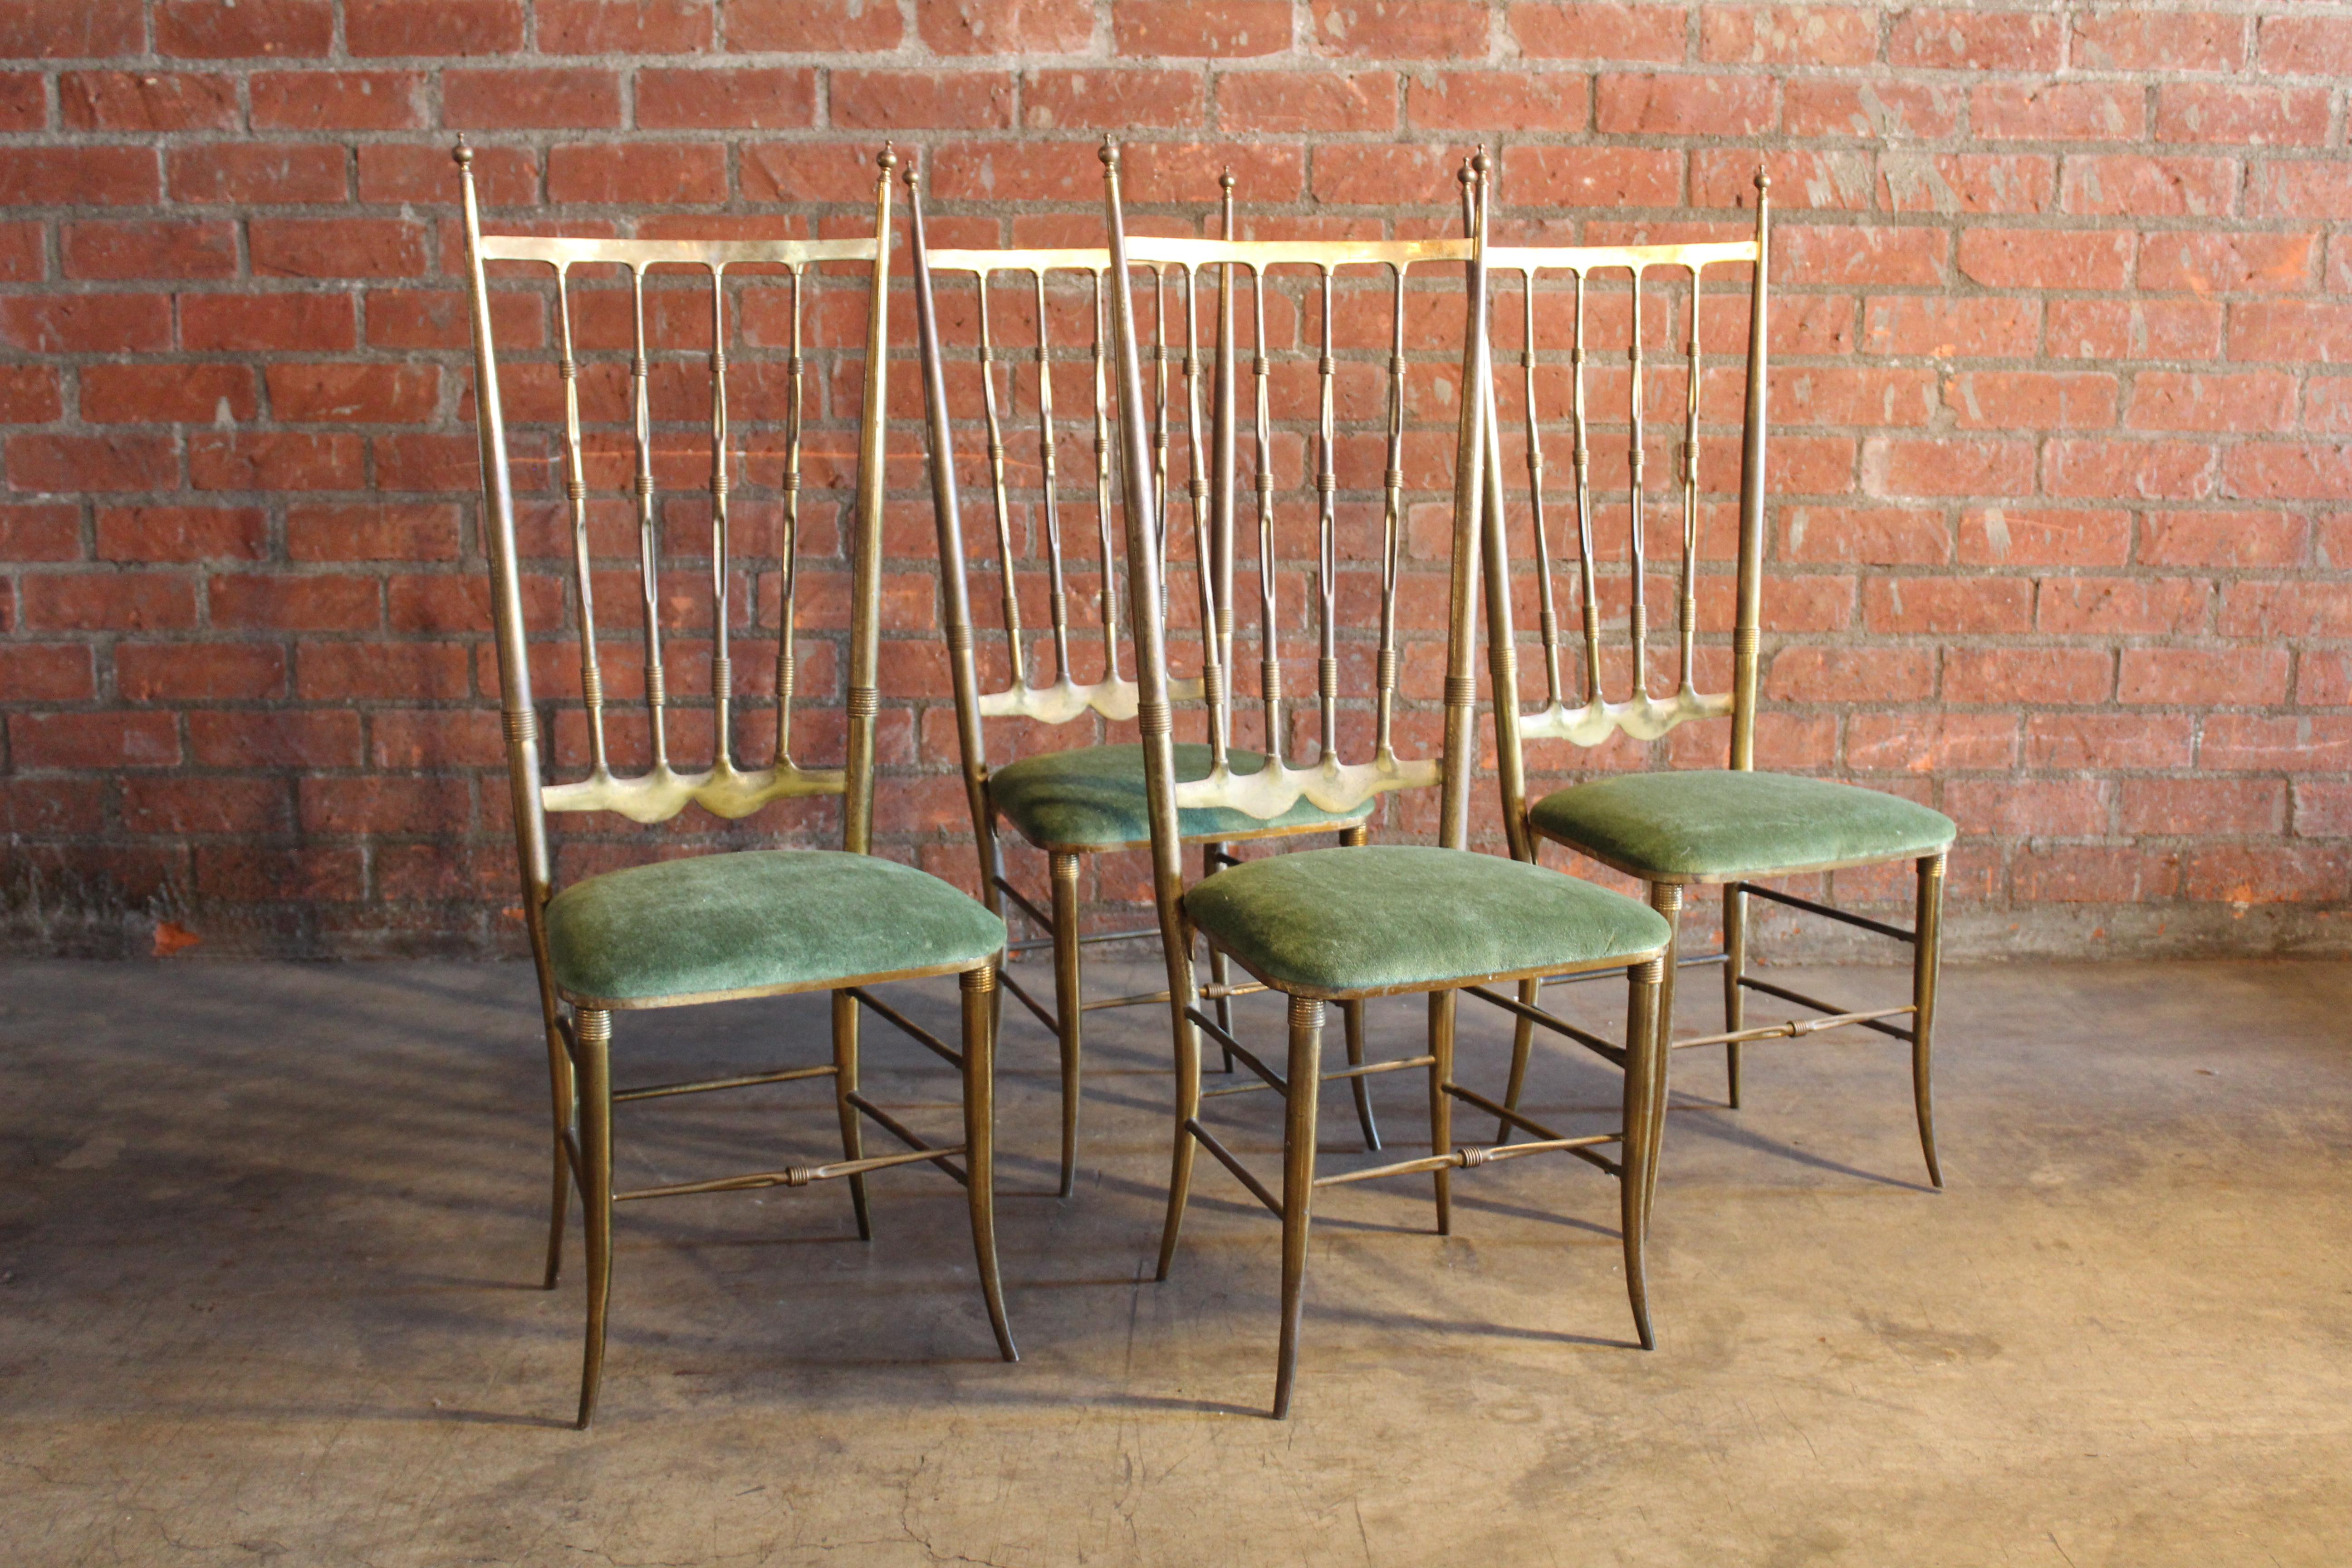 Vintage 1950s Italian brass Chiavari chairs. Newly upholstered in green mohair. They are in good condition with age appropriate patina.